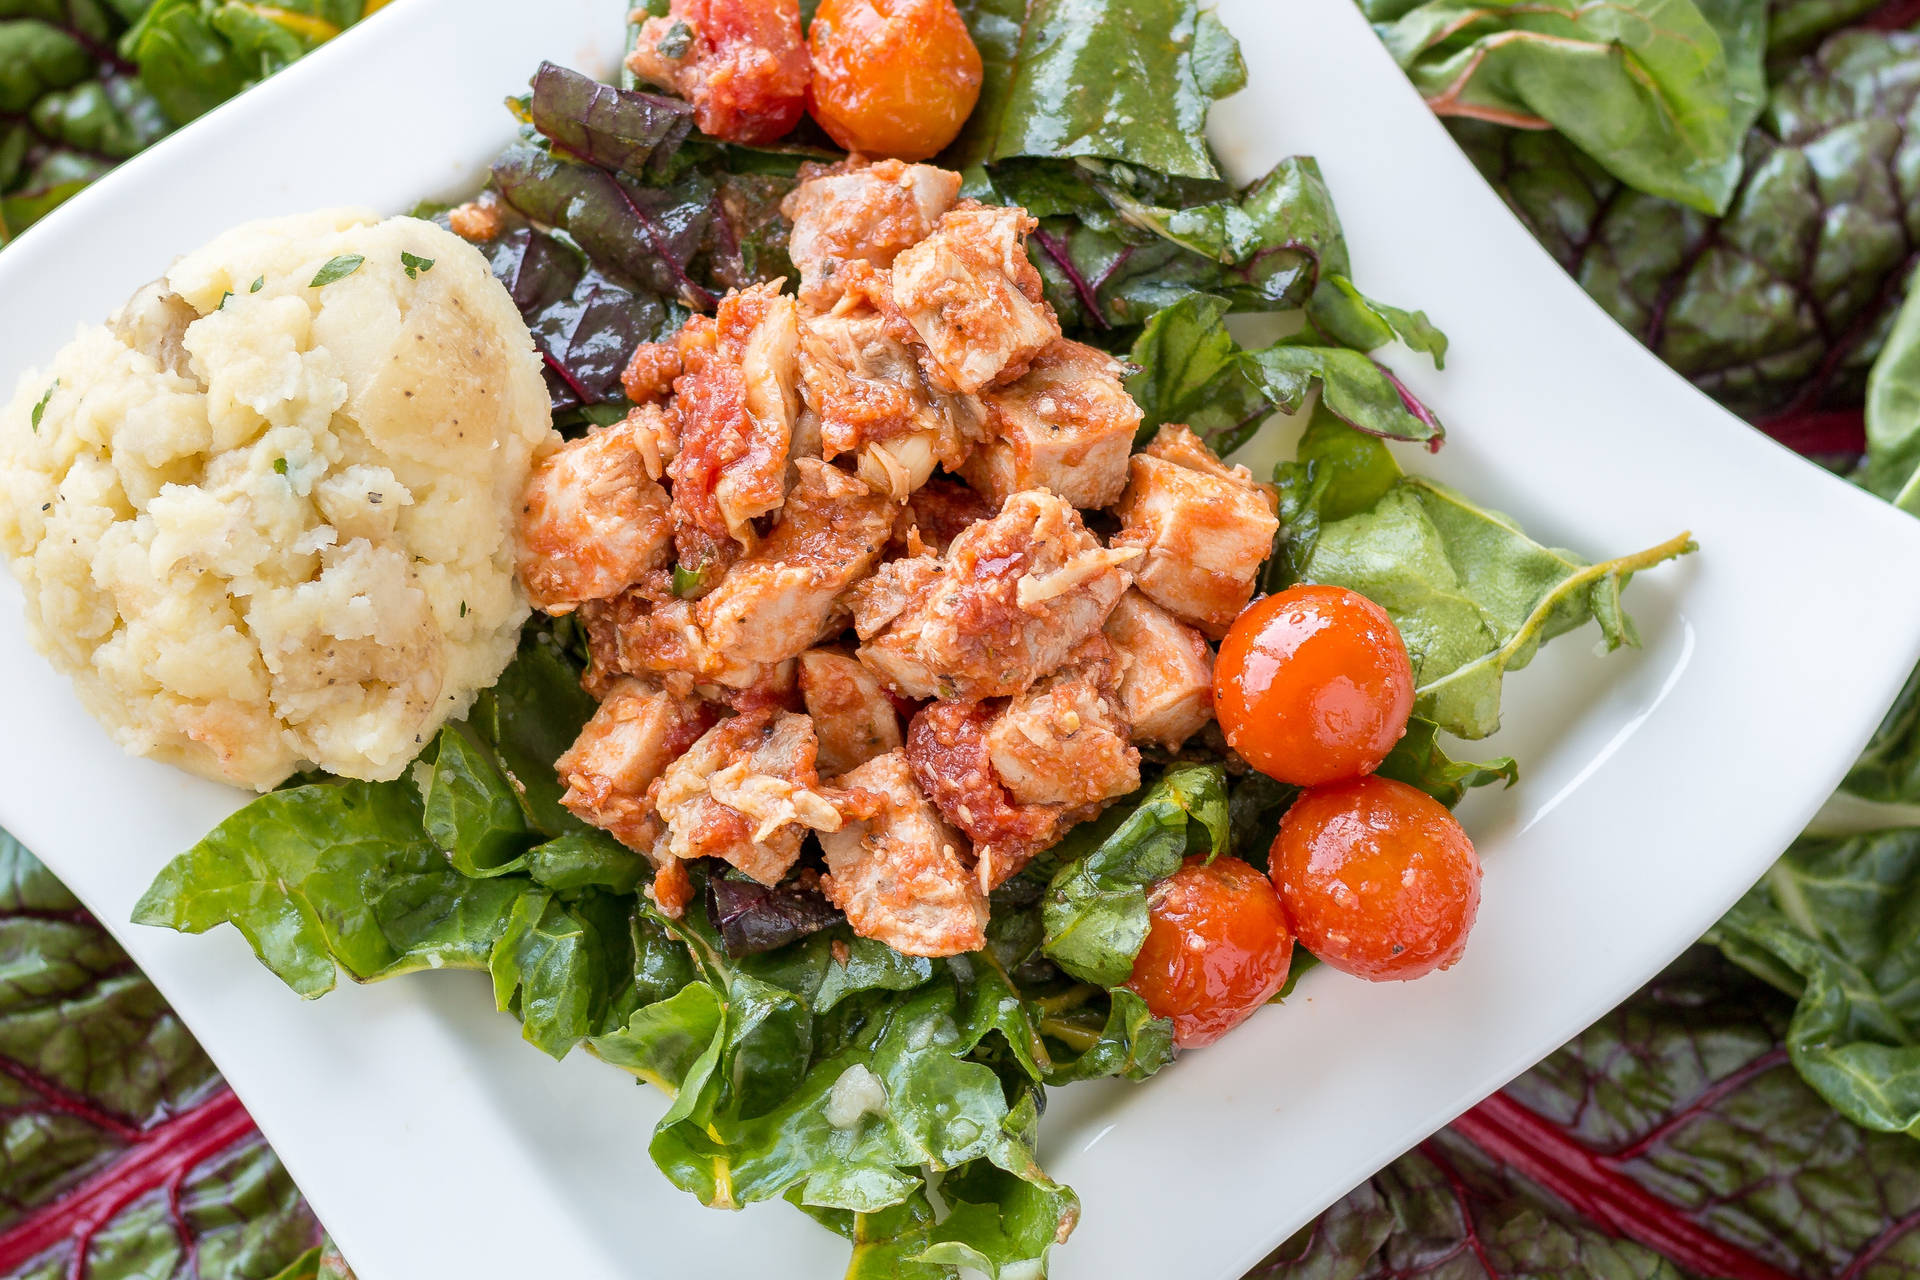 A Heart-healthy Meal: Chicken Salad With Mashed Potatoes Background